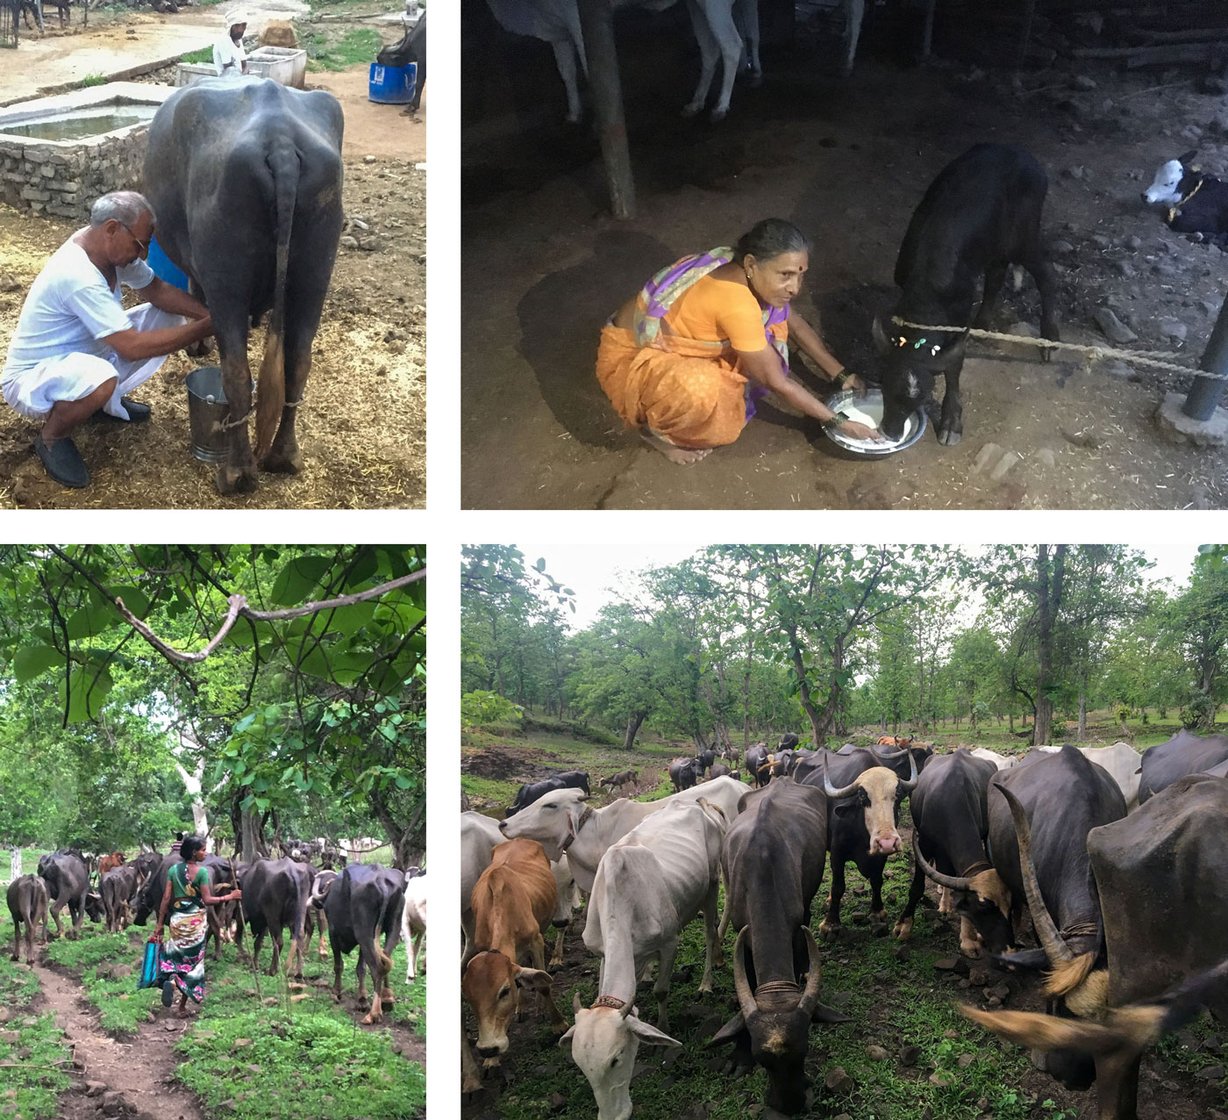 Nanda Gaolis live in 40-50 villages of Wardha, around the Bor Tiger Reserve. They rear the native Gaolao cow breed (top row), and are the major suppliers of milk and milk products in the district. The fall in demand during the lockdown has hit them hard (file photos)

